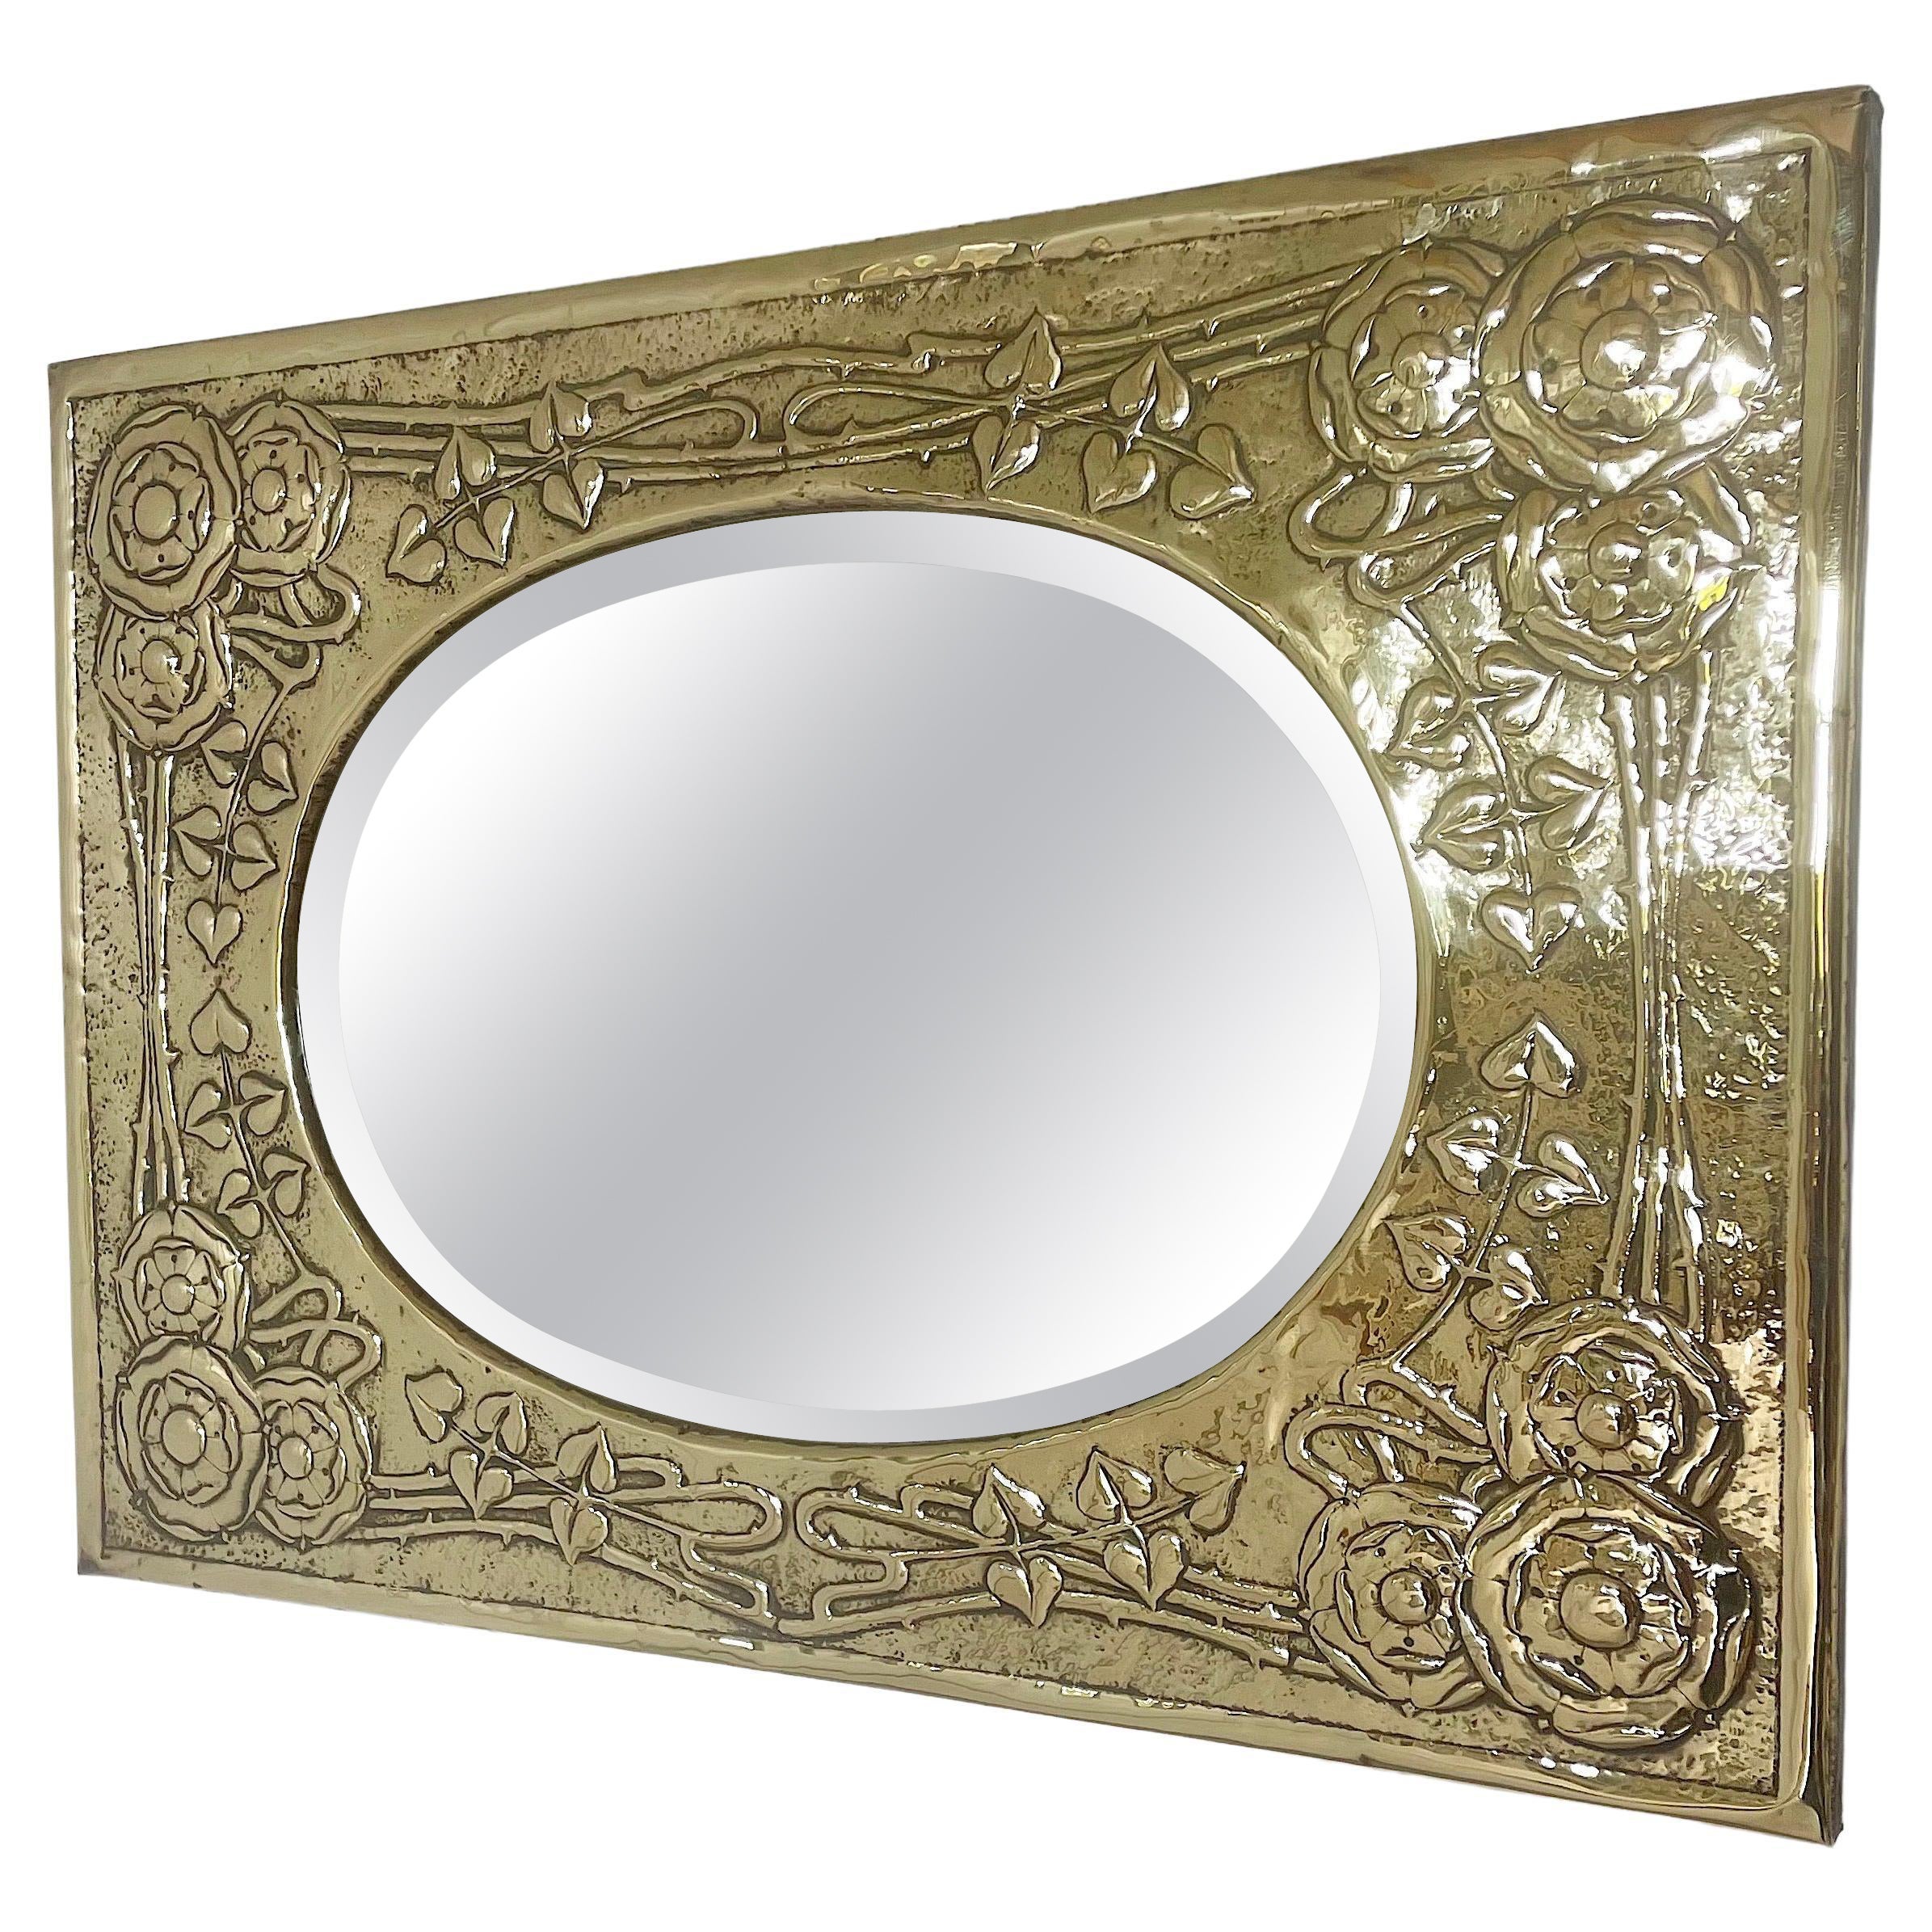 Glasgow School Arts and Crafts brass framed Mirror For Sale